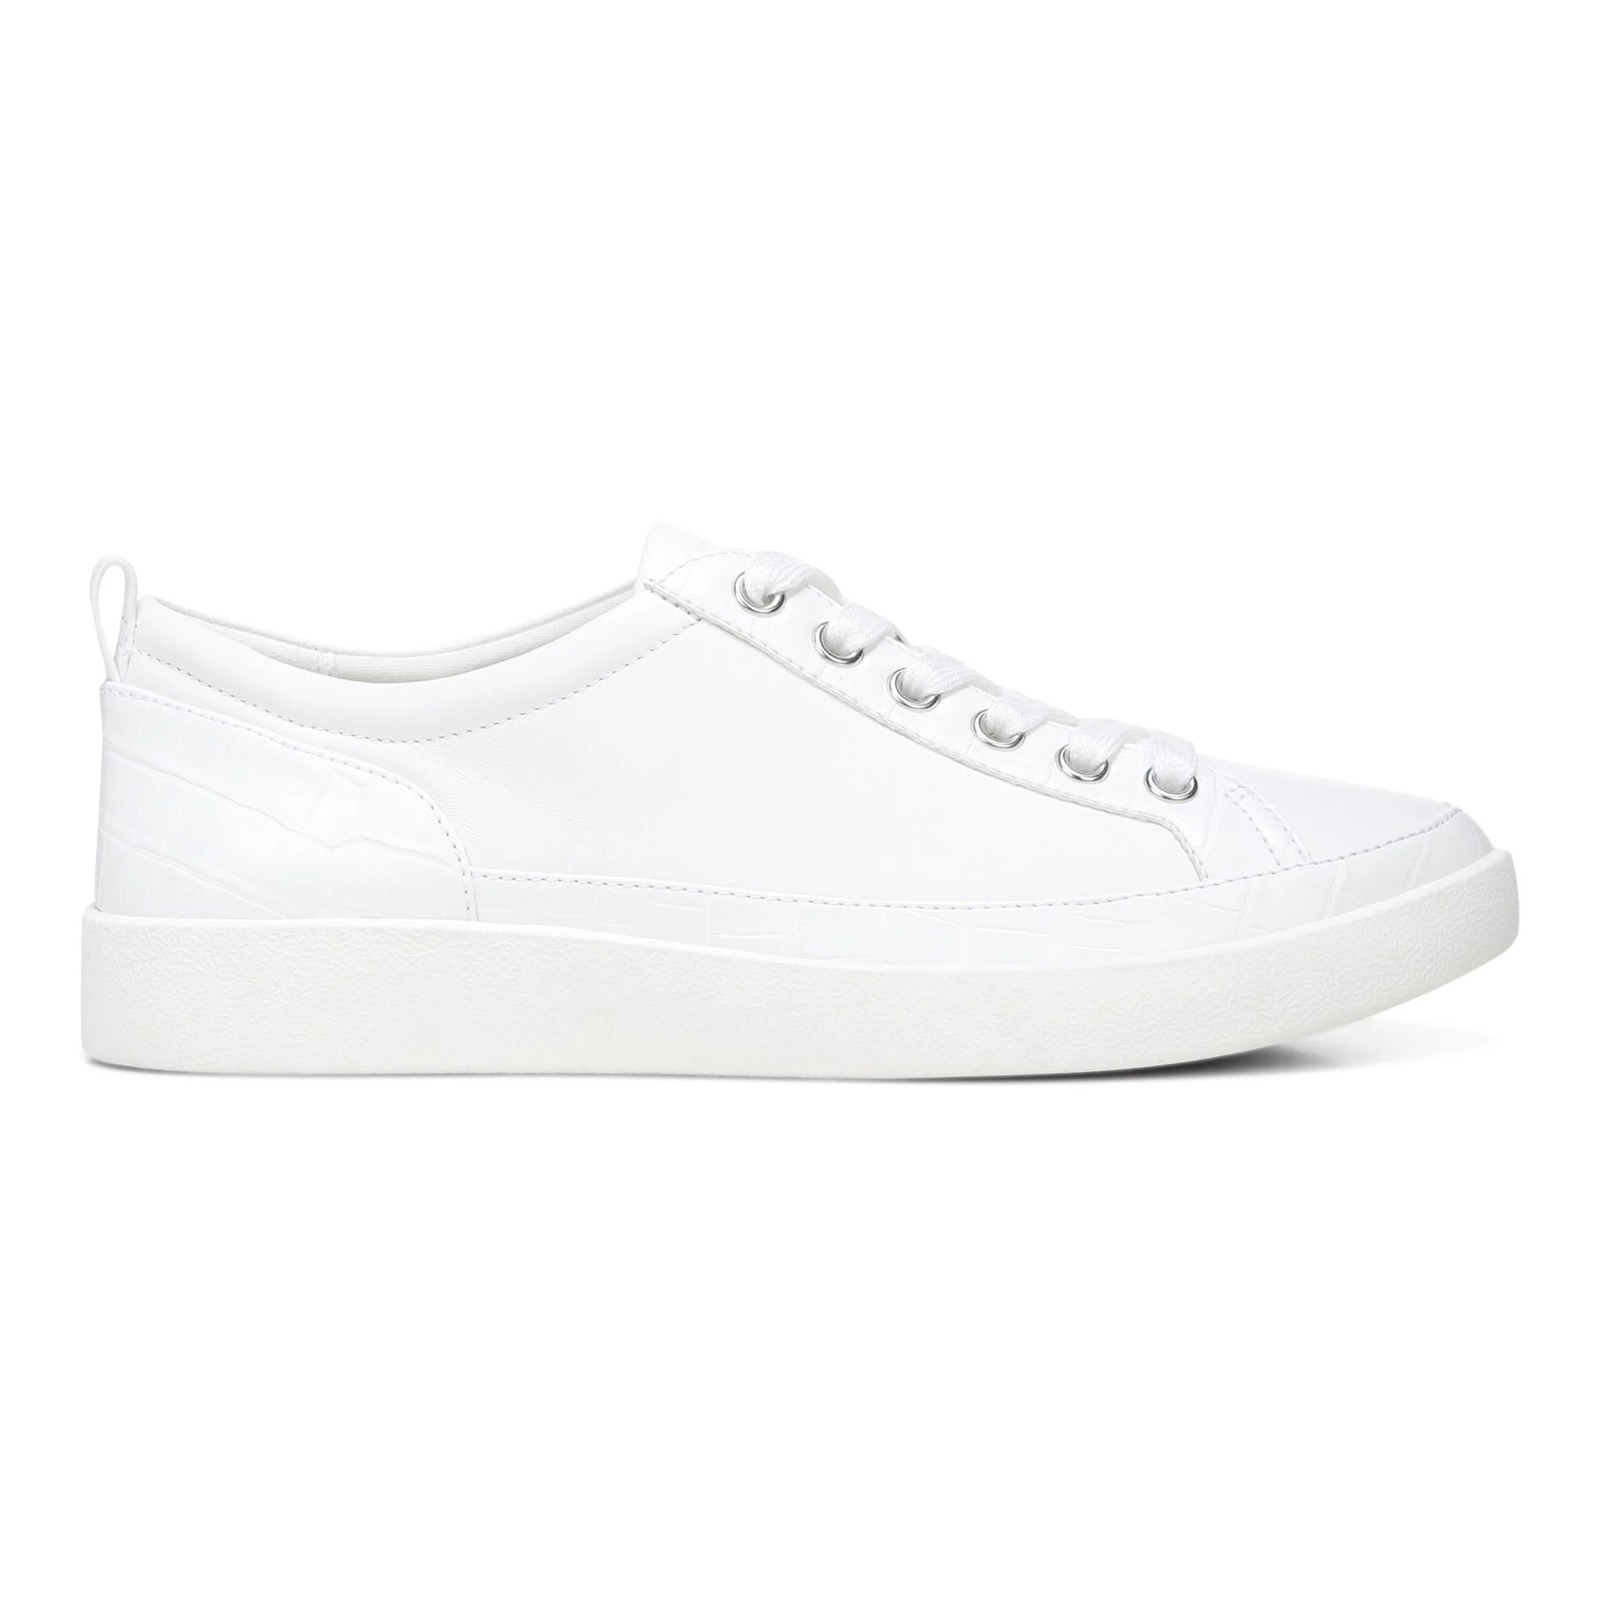 Vionic Women's Winny Sneaker - White Leather - Athletic Shoes